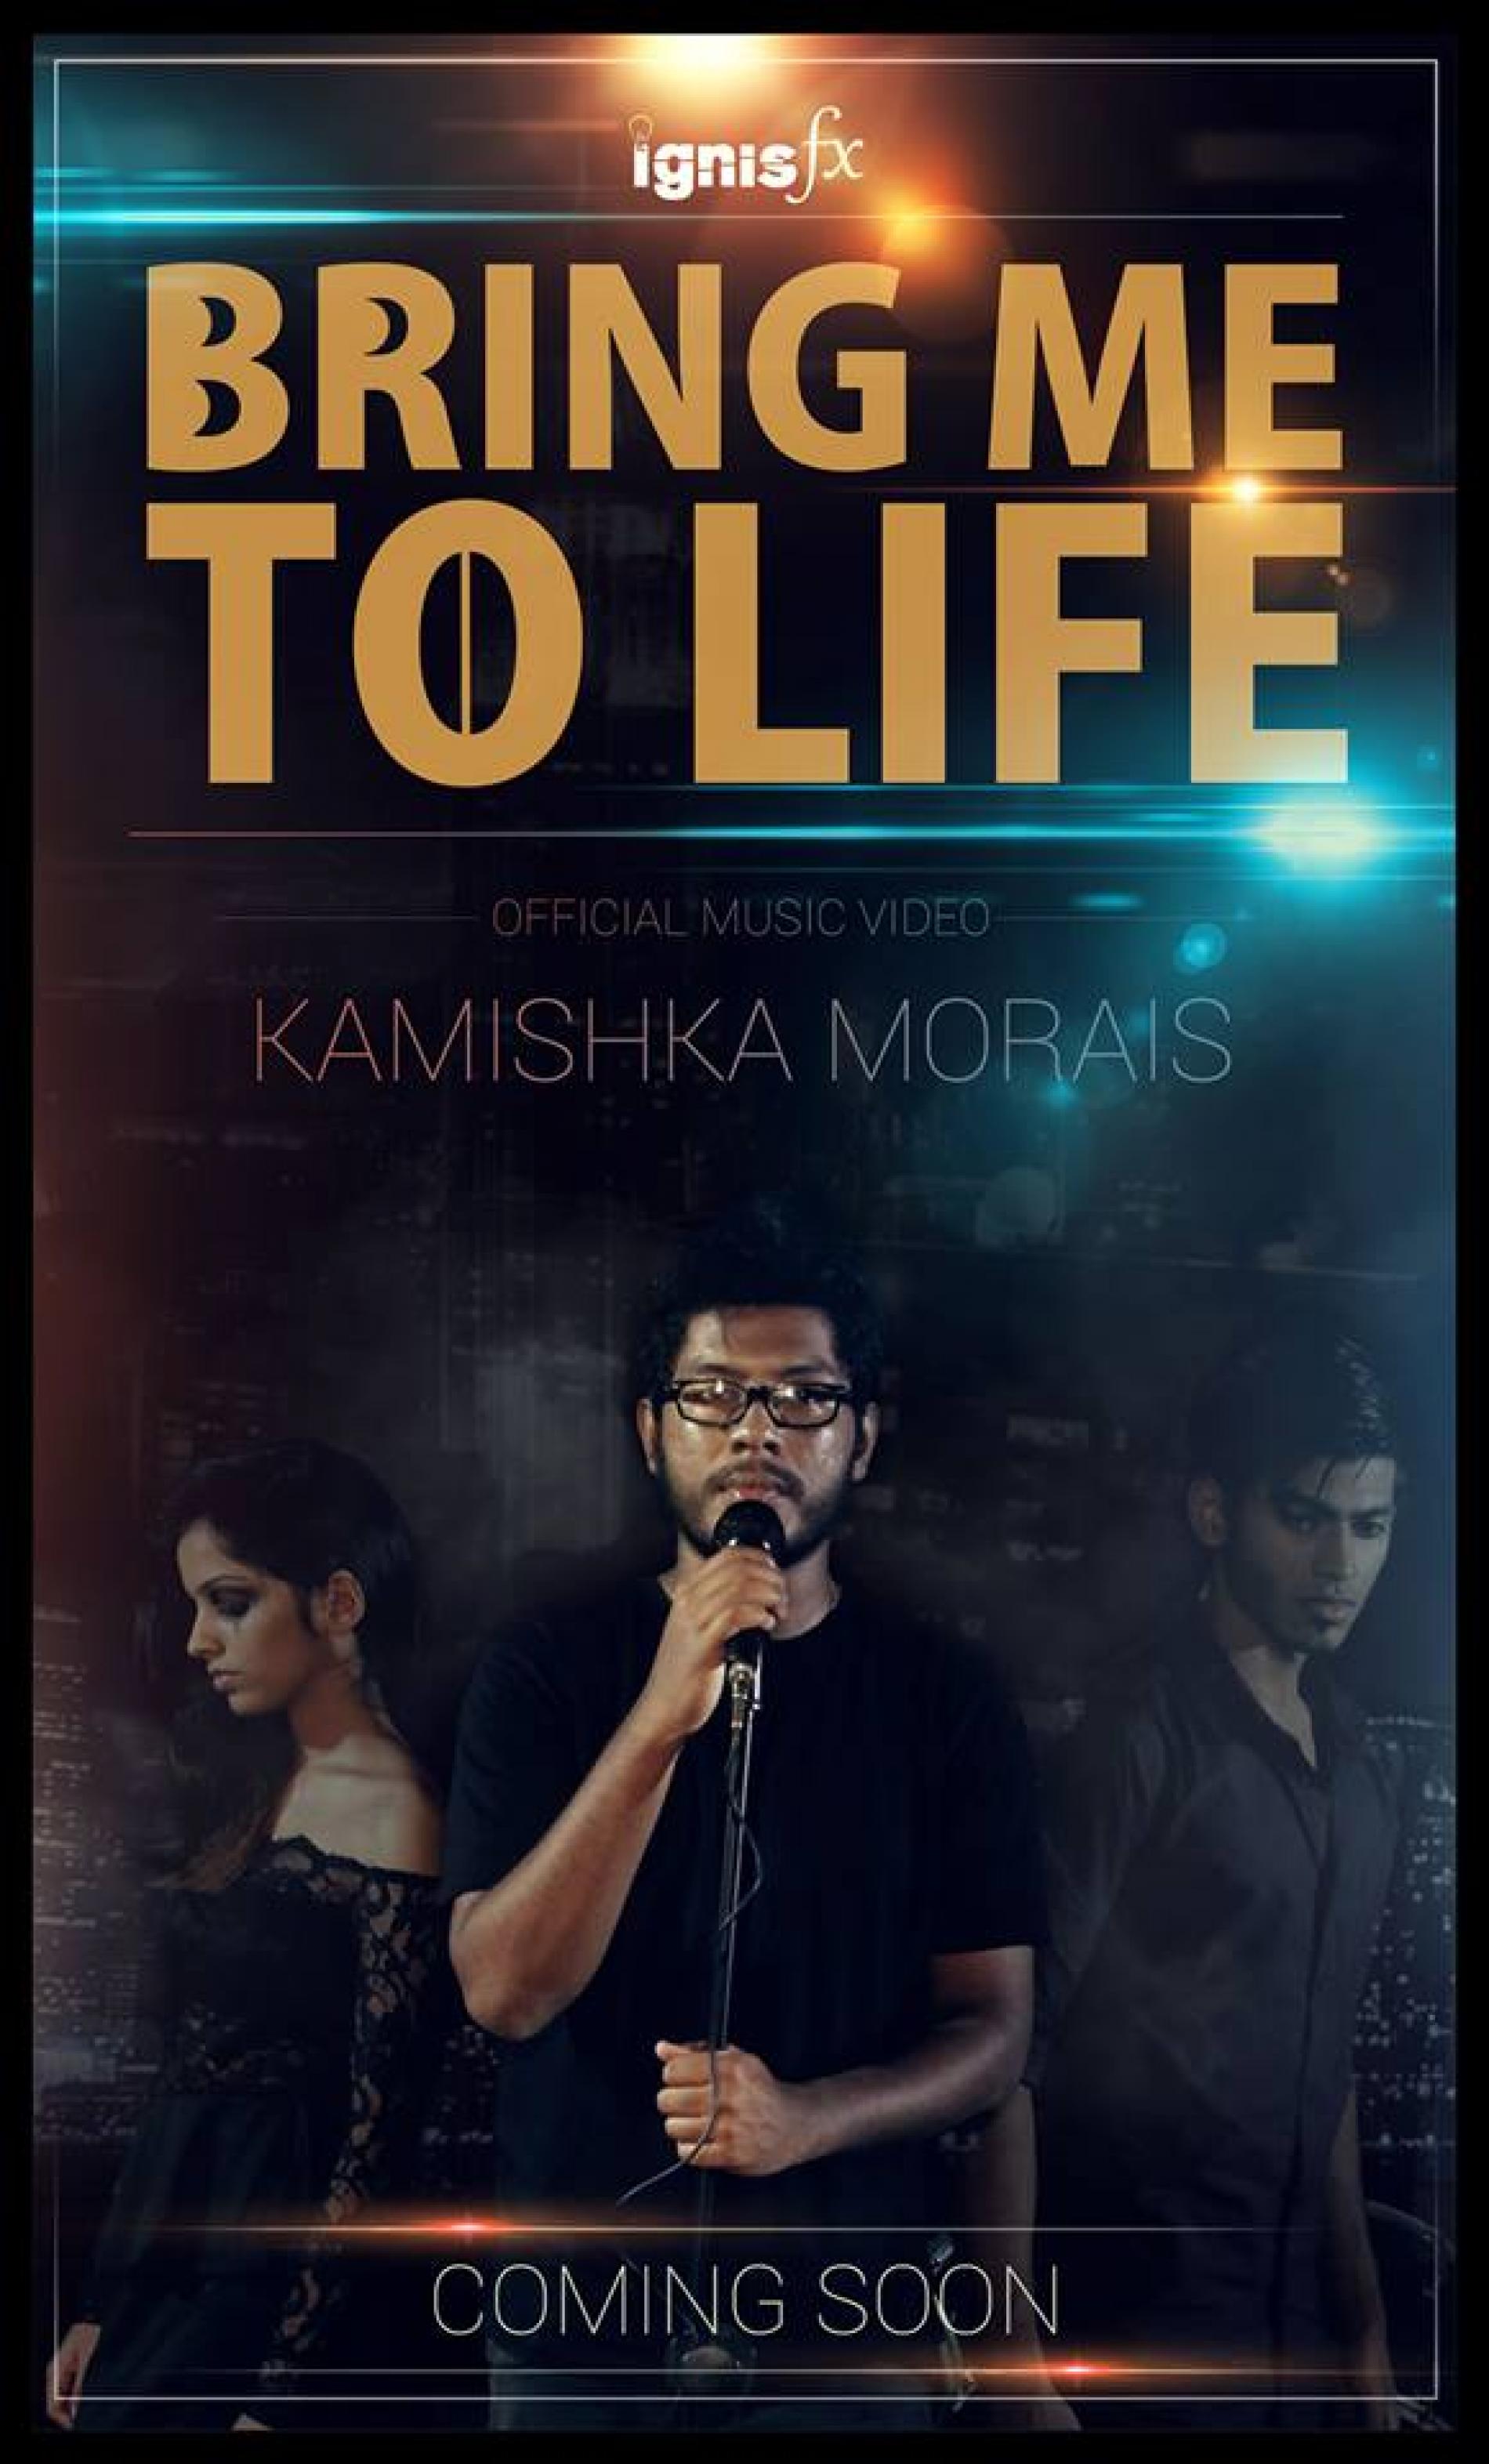 Kamishka Morais – Bring me to life ( Official Music Video Trailer )